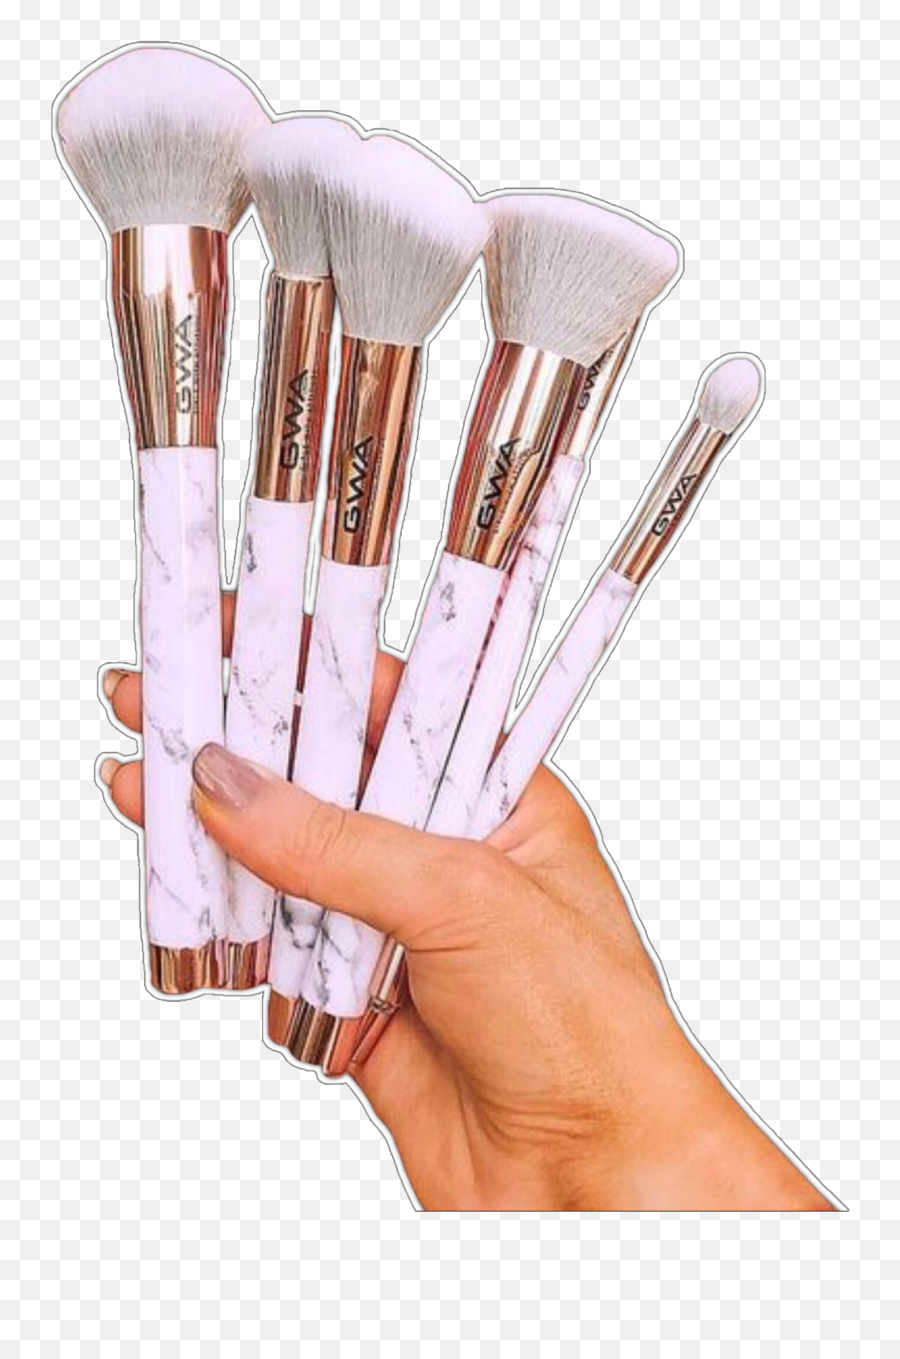 Png Pngs Makeup Brushes Nichememes Freetoedit - Makeup Brushes In Hand Emoji,Makeup Emoji Png